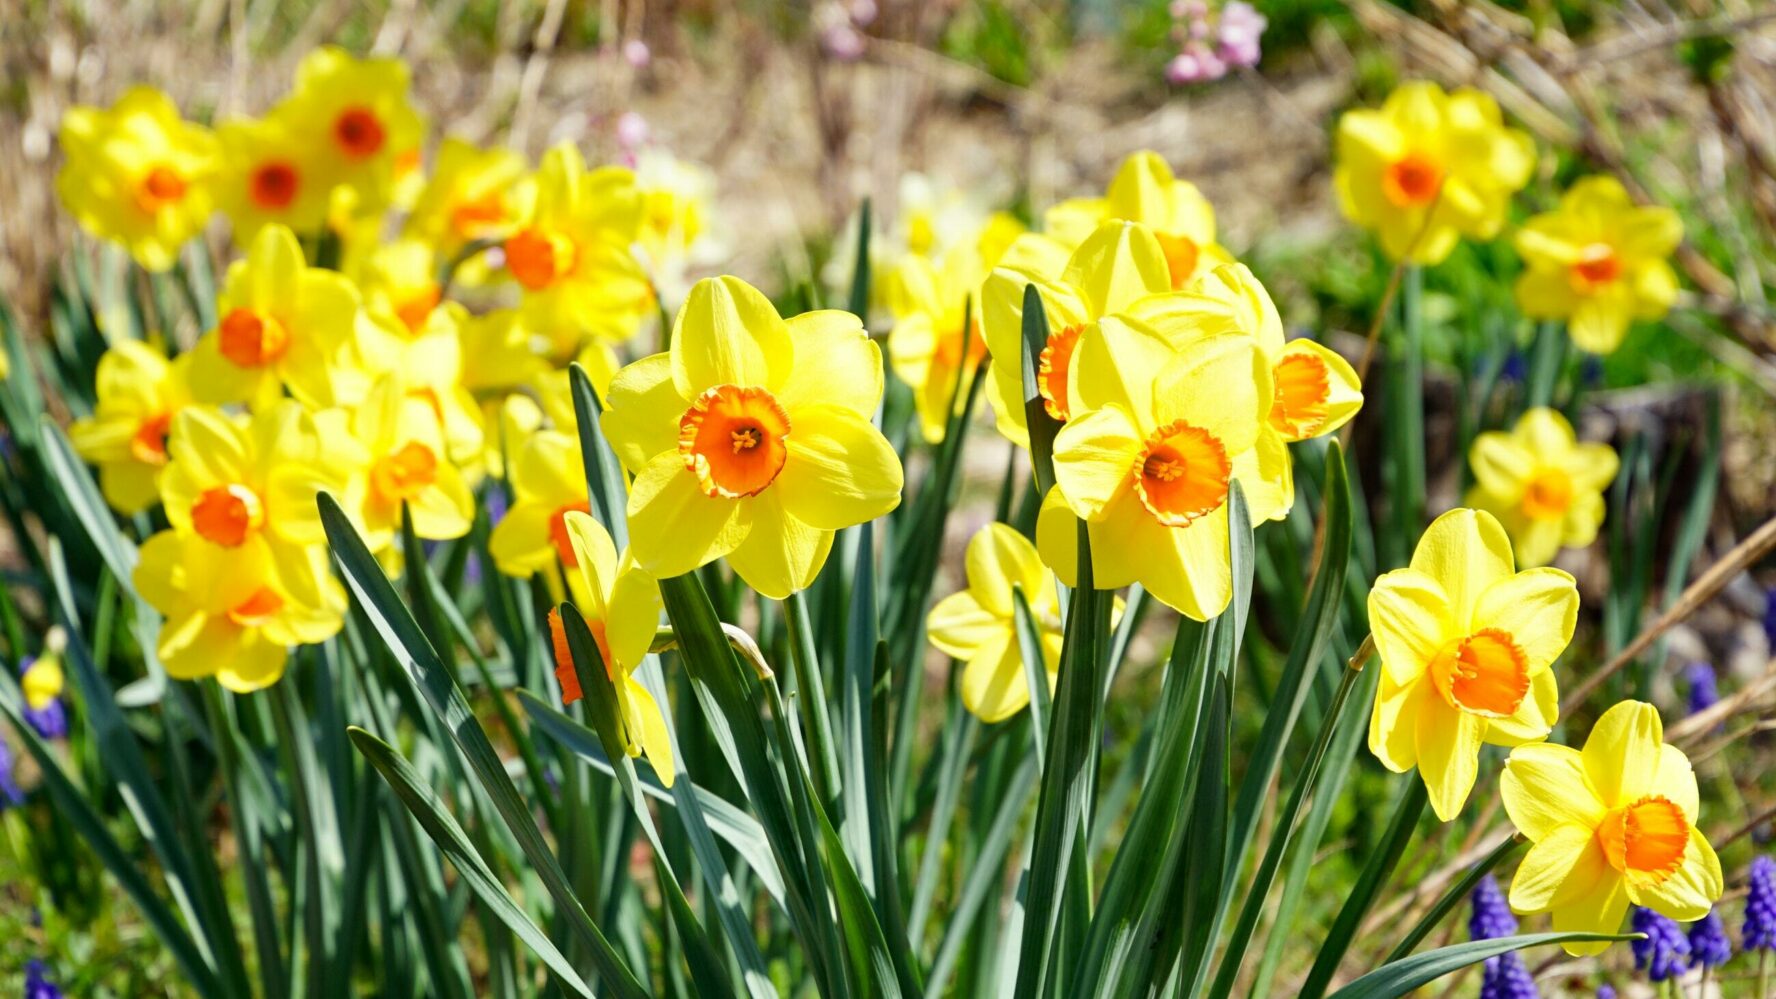 Bright Spring daffodils growing in a garden during Lent.